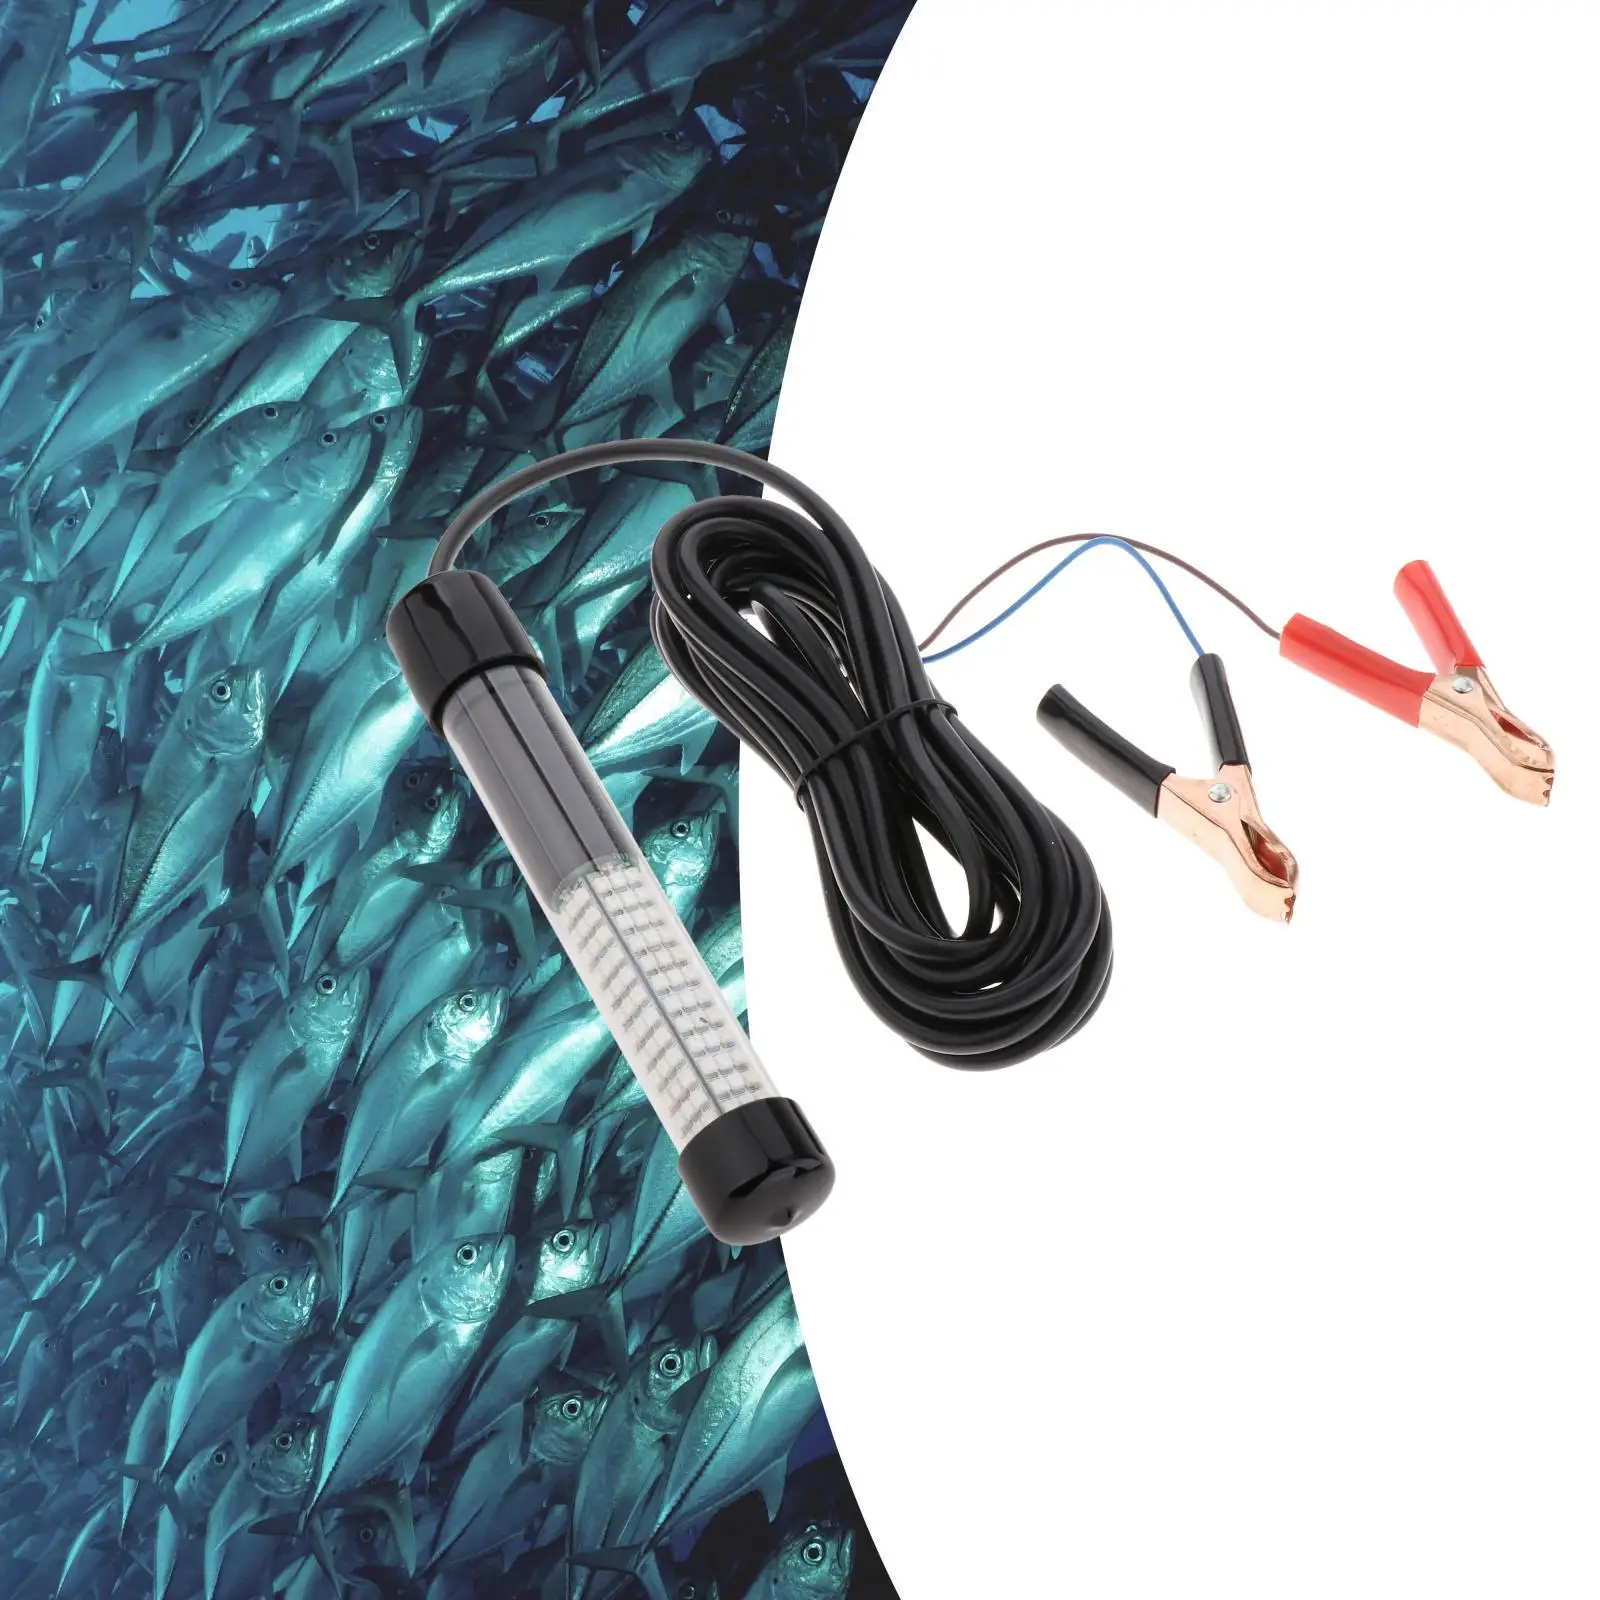 Submersible Fishing Light Outdoor Waterproof 5M Cord 20W Water Portable Crappie Fishes Finder Lamp for Ice Fishing